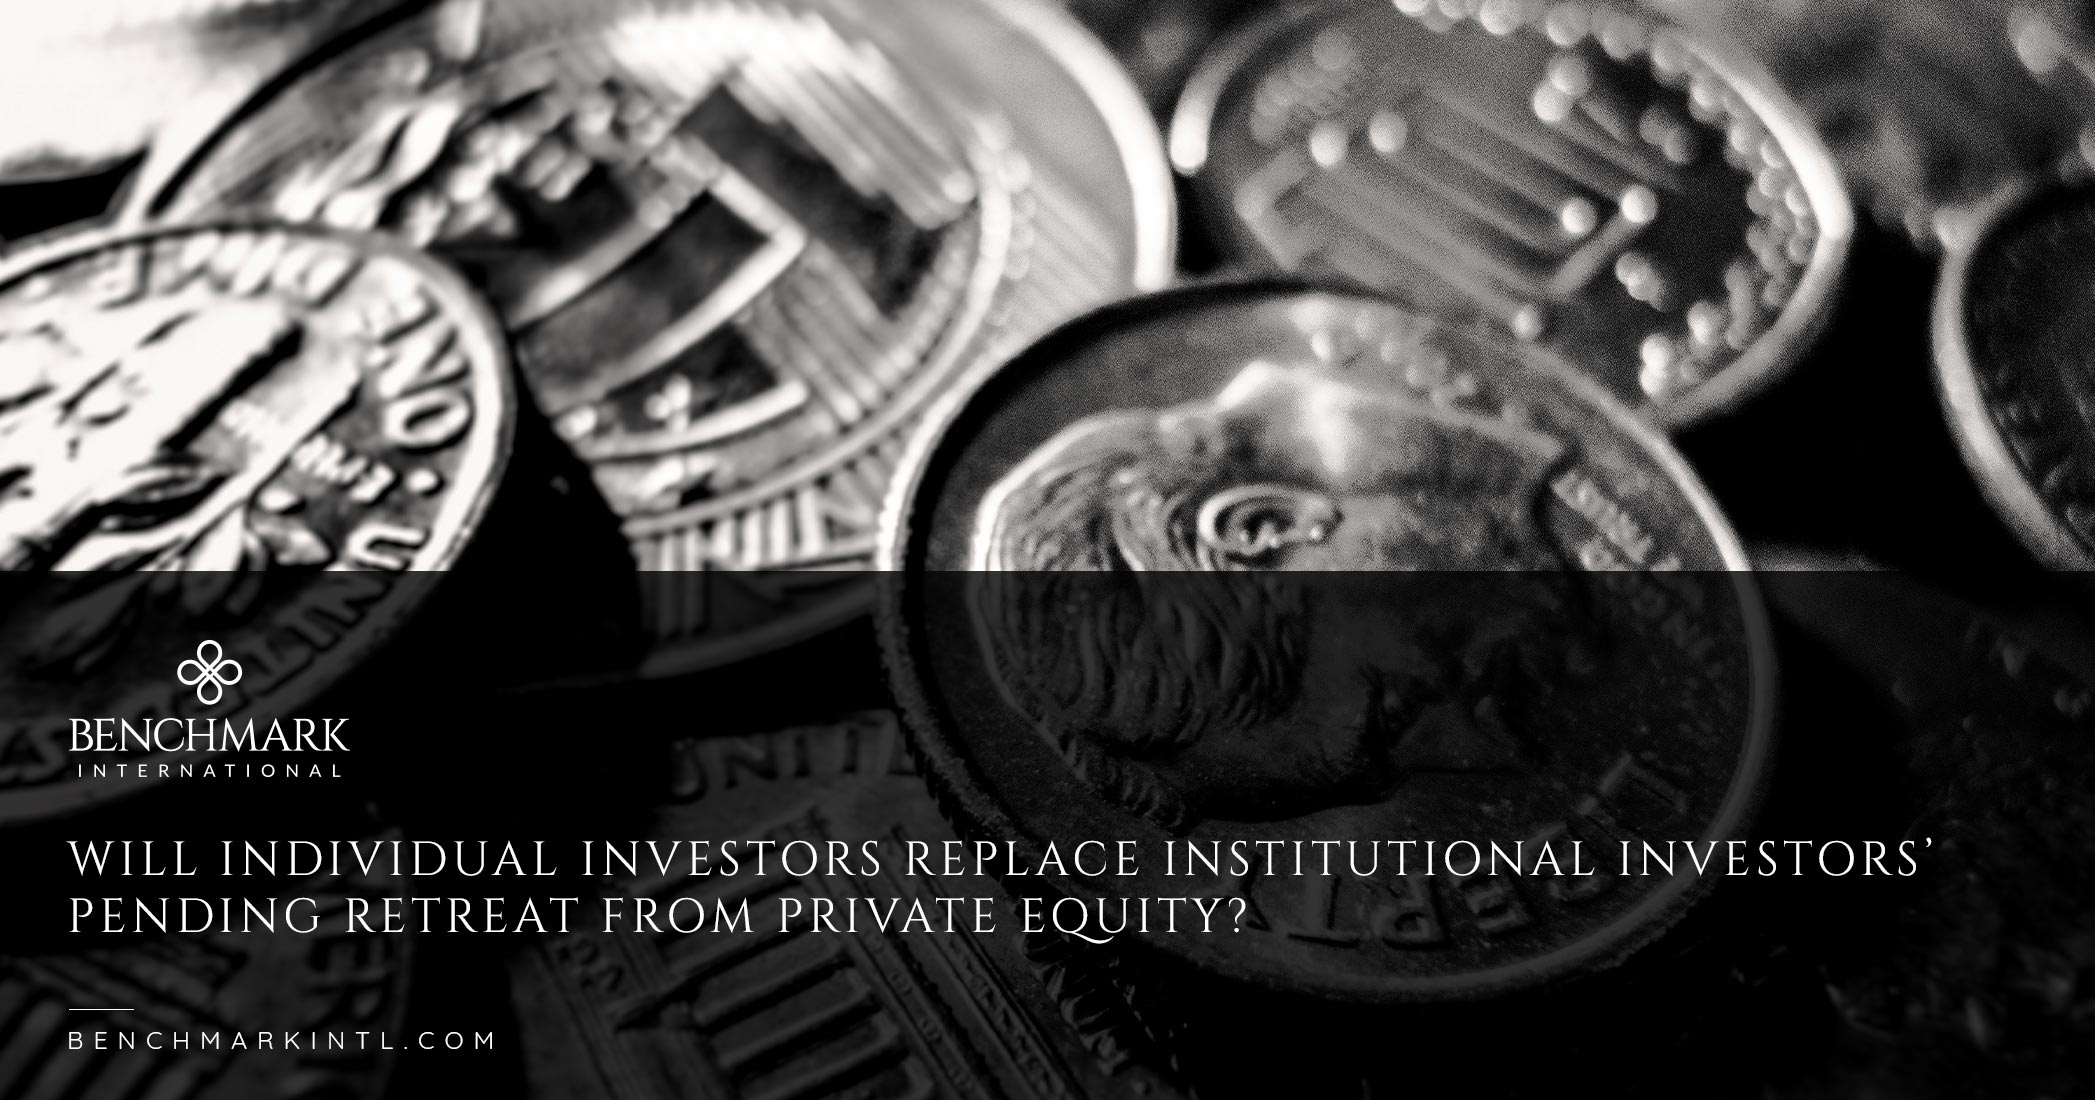 Will Individual Investors Replace Institutional Investors’ Pending Retreat from Private Equity?